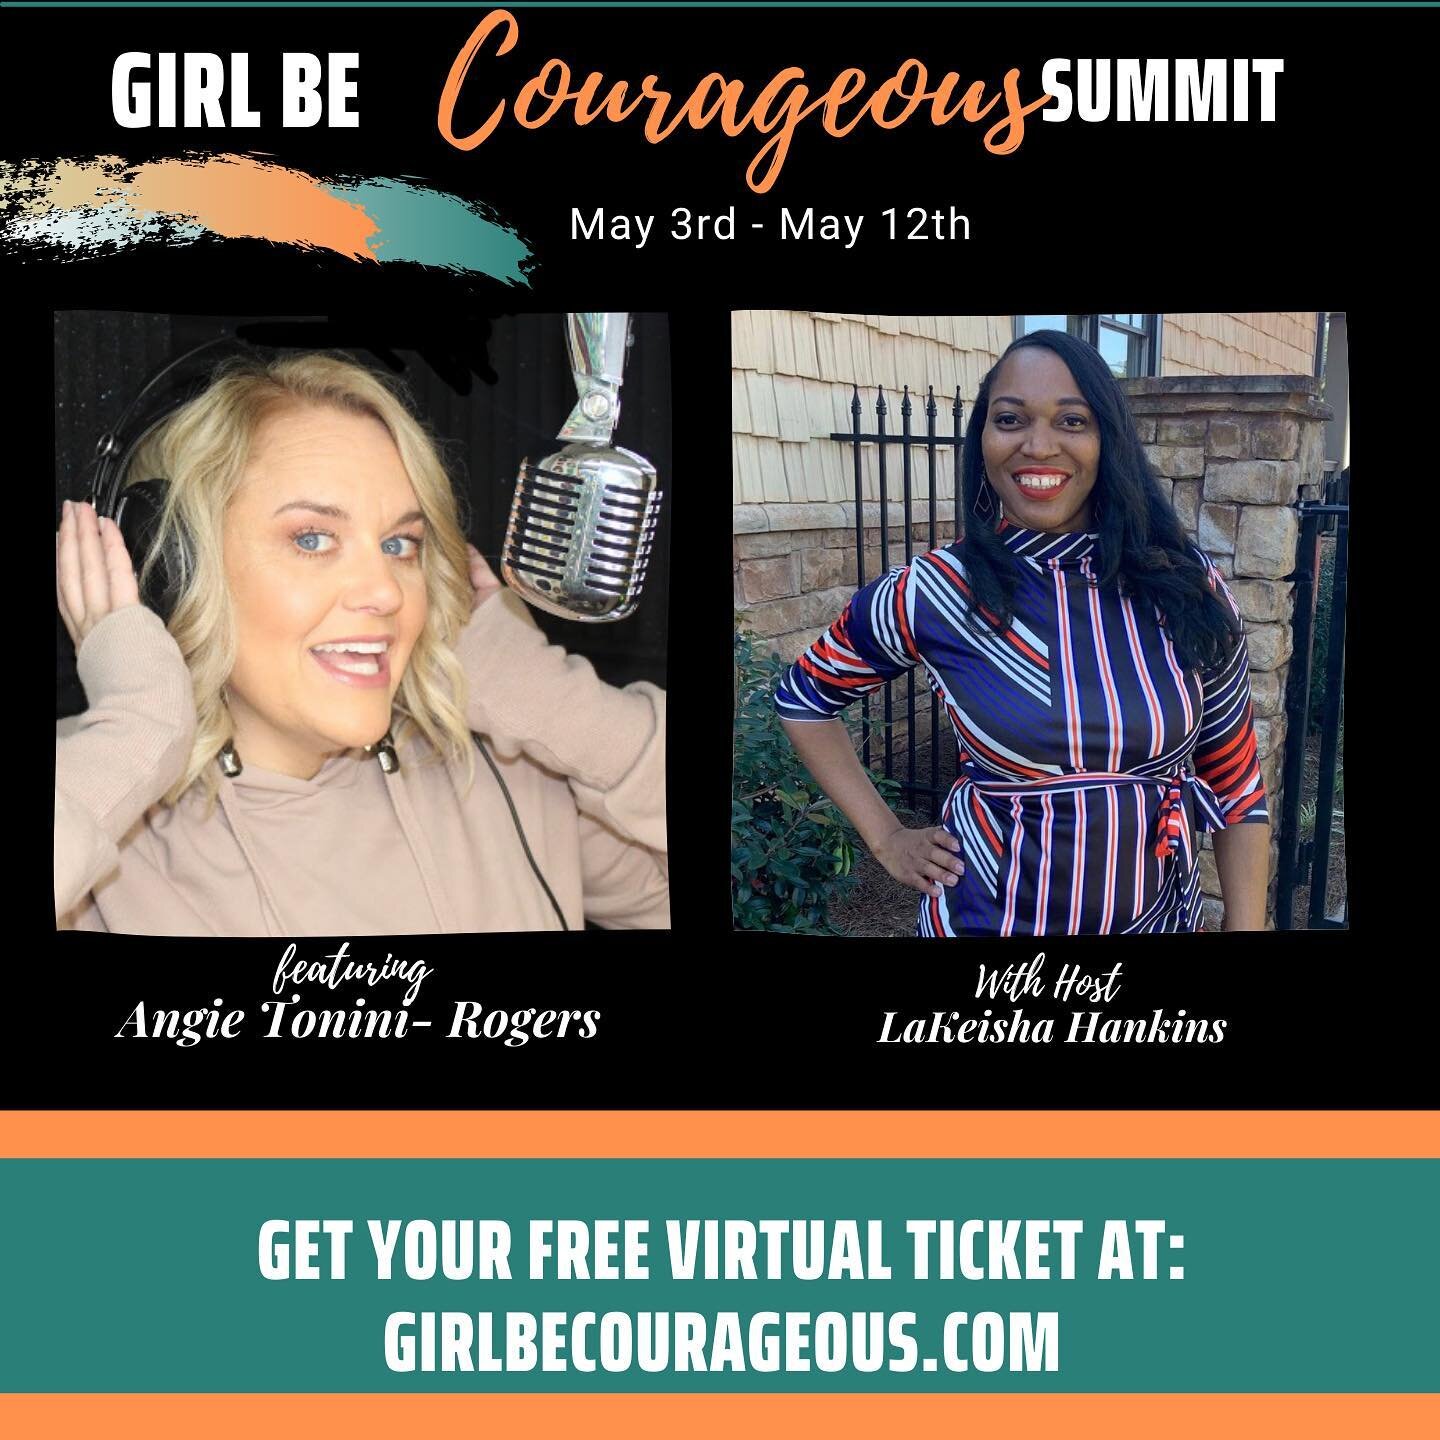 Girl, Be Courageous! Tune in! #becourageous #boldactions #doitscared #fearhasnoplace